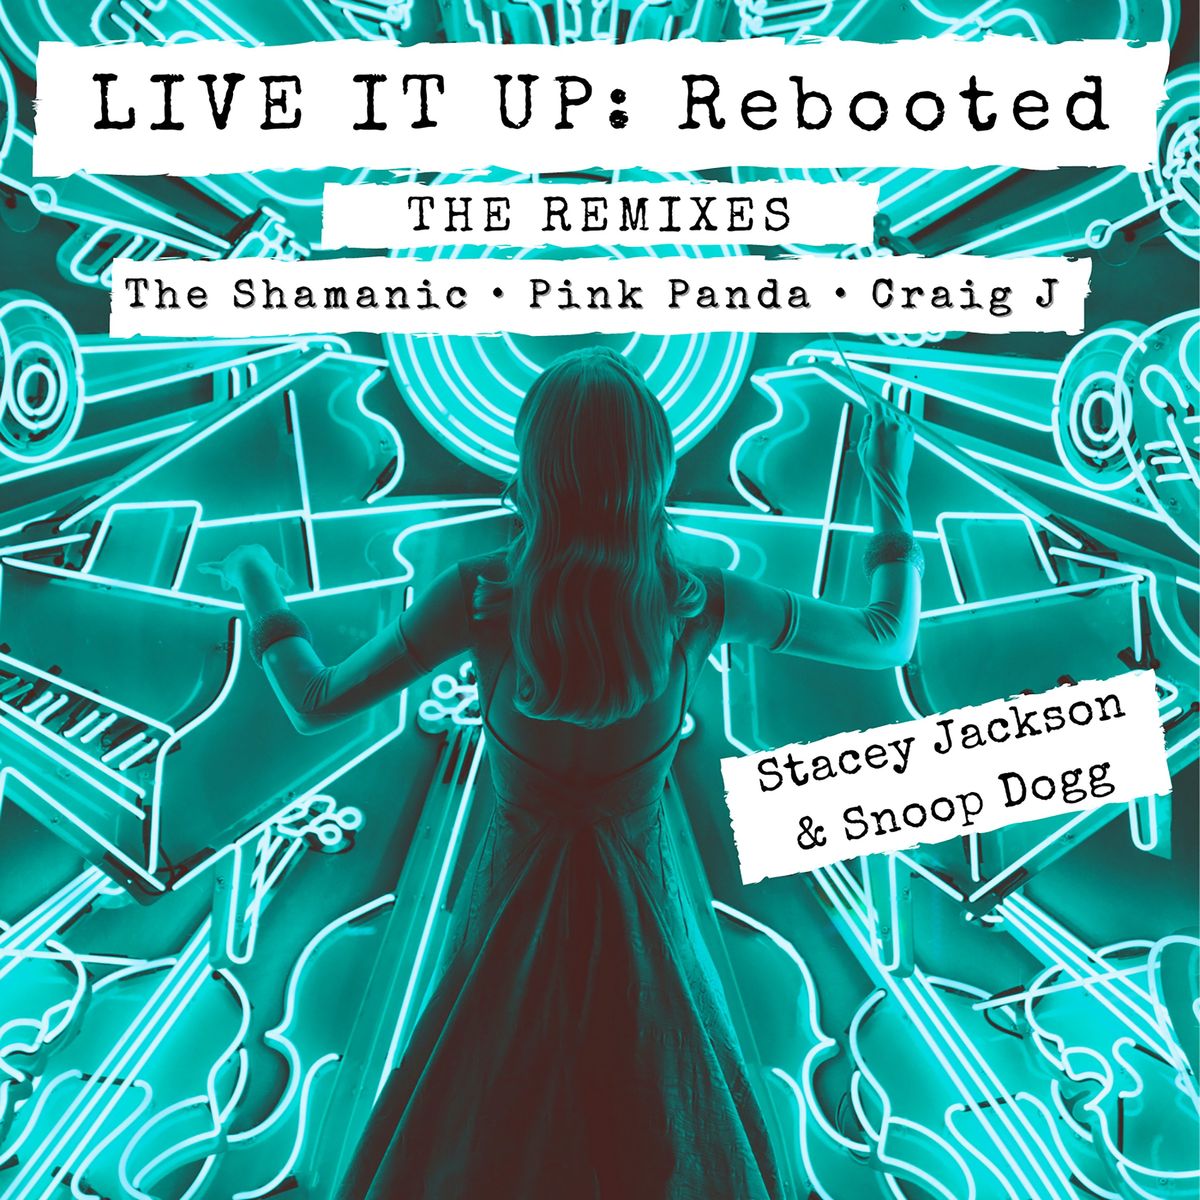 Stacey Jackson ft Snoop Dogg - Live It Up (Rebooted) (Pink Panda Remix)